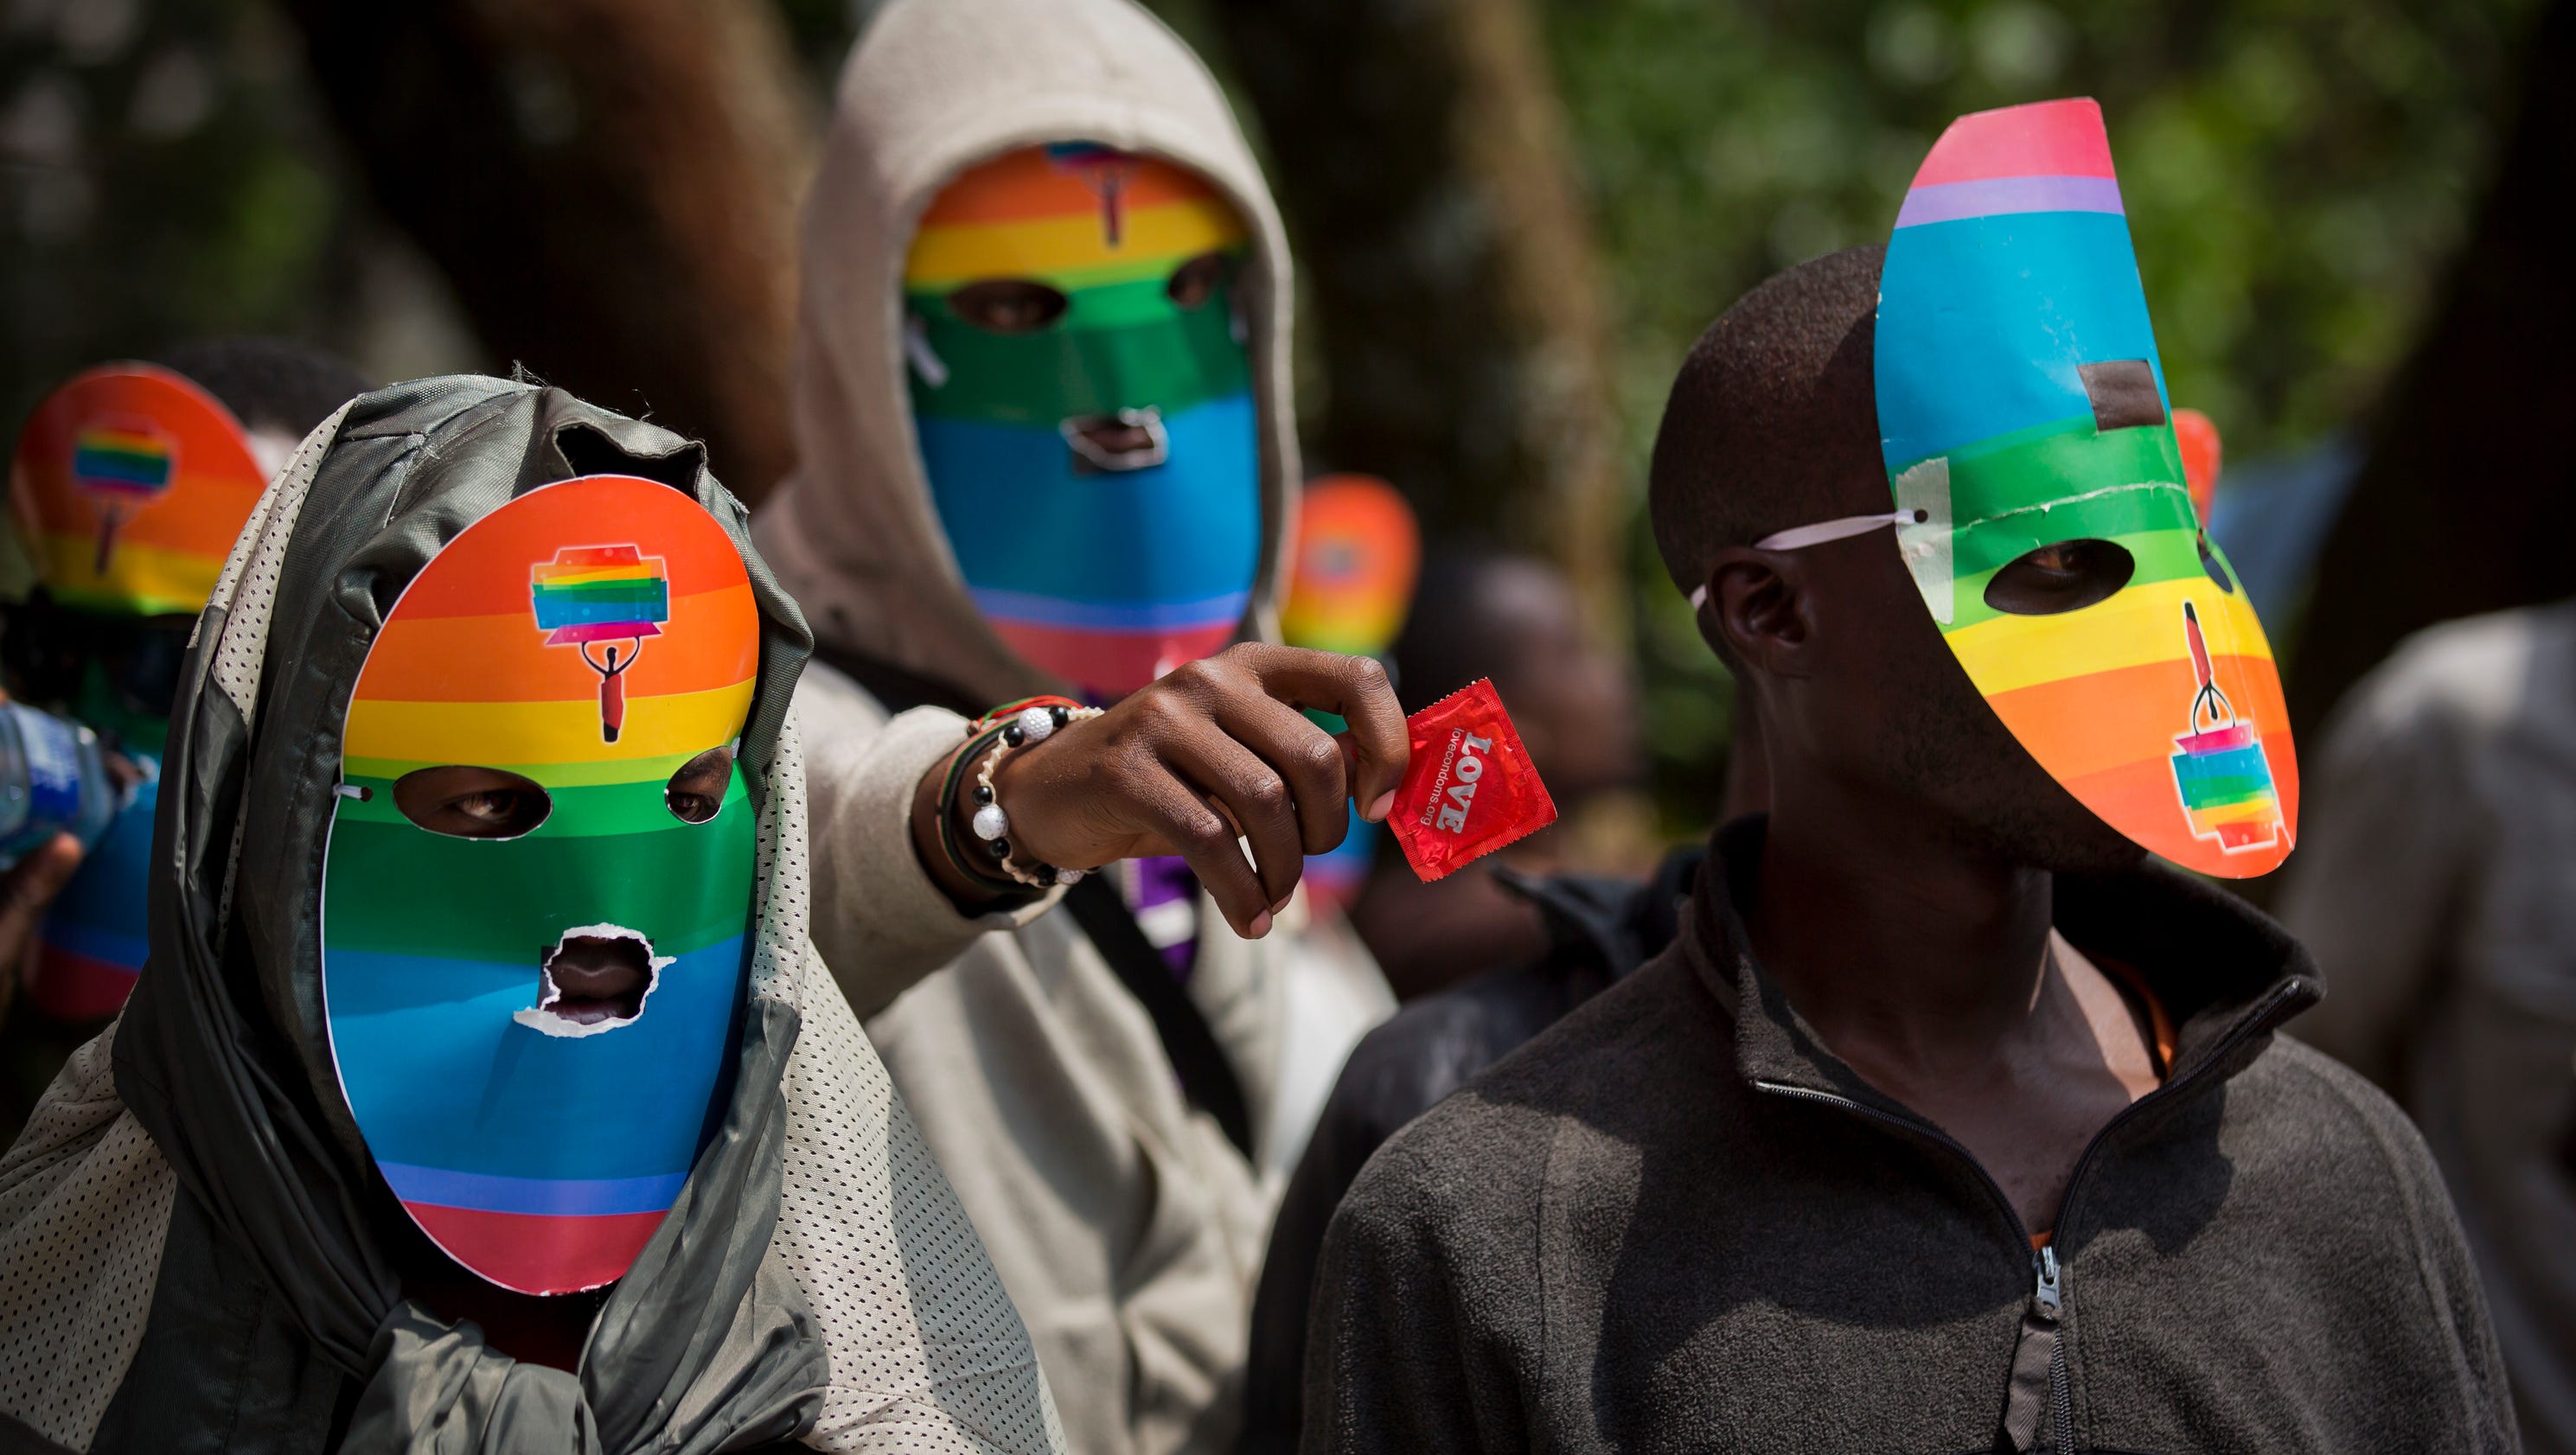 Kenyan Court Anal Exams To Test Sexual Orientation Are Legal